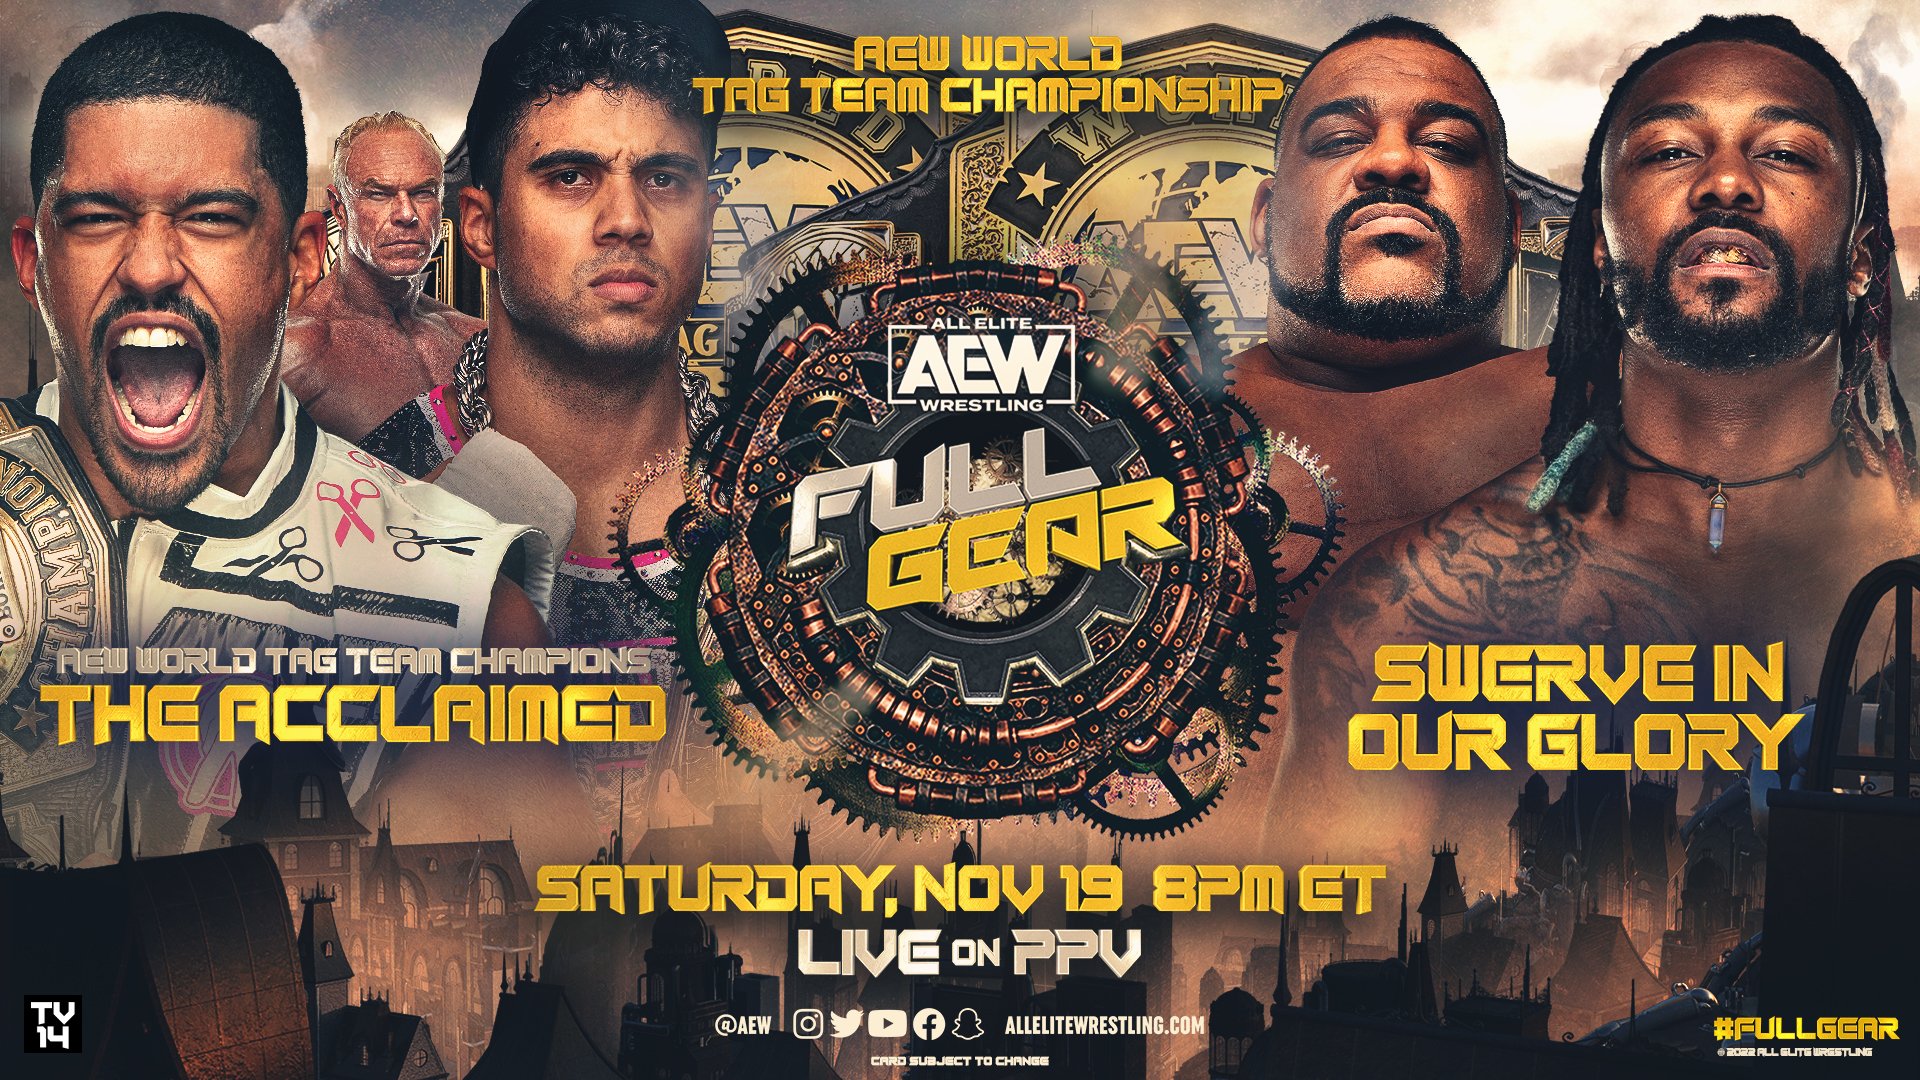 AEW Full Gear Results The Acclaimed vs. Swerve In Our Glory